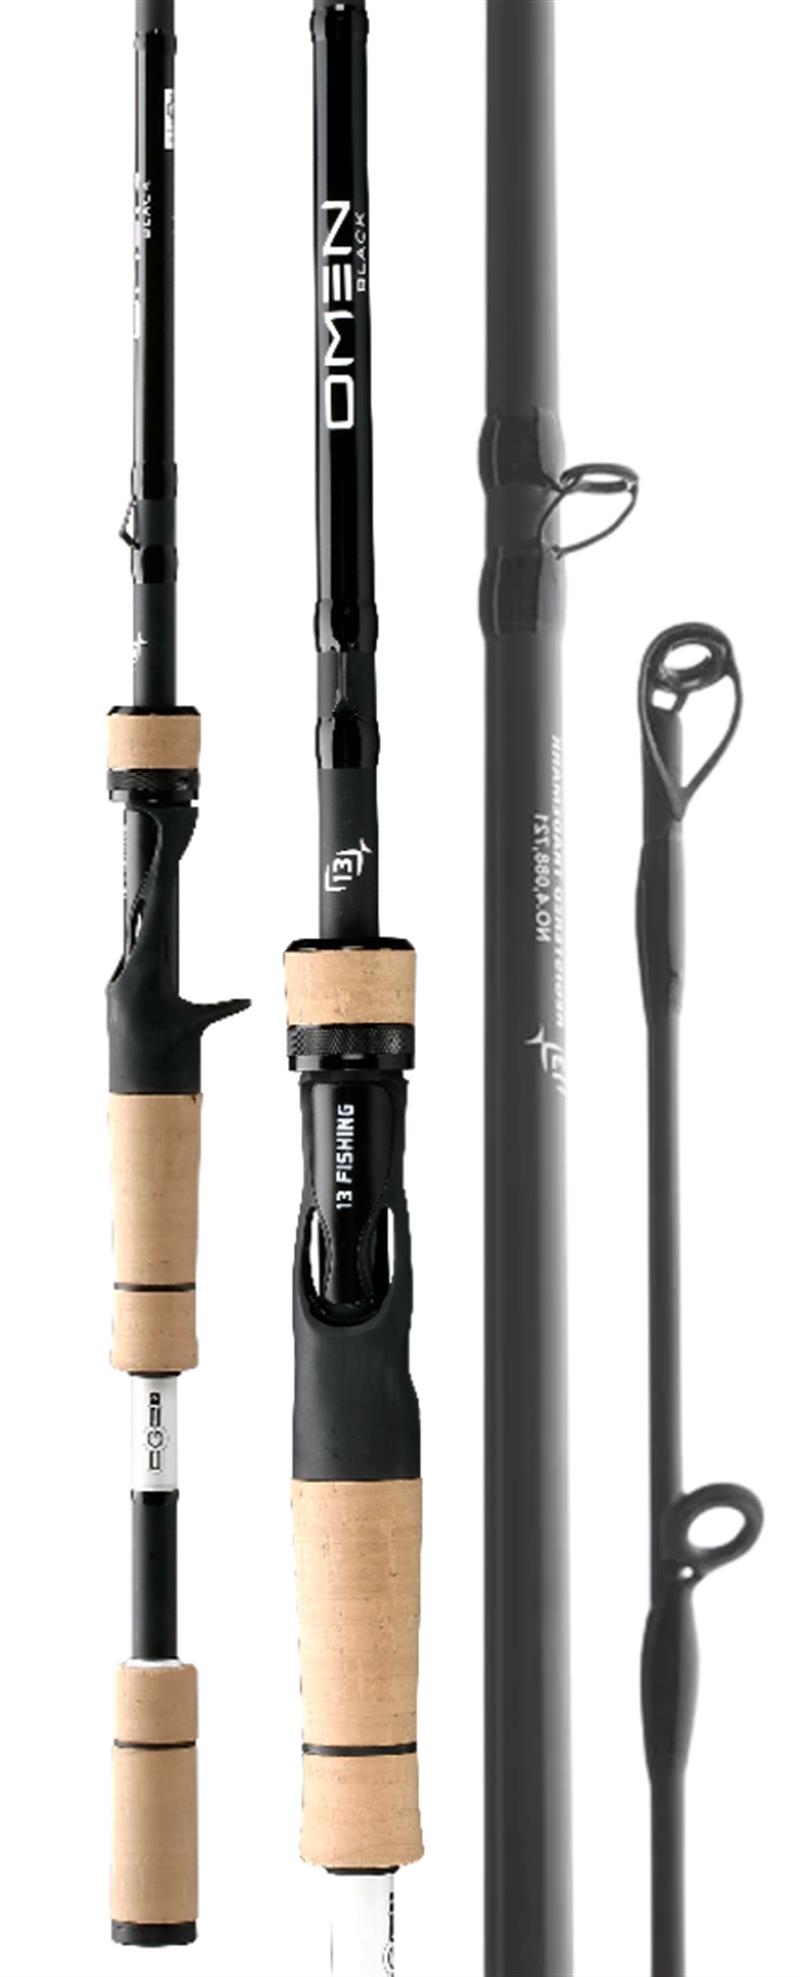 Shop 13 Fishing Rods and Reels